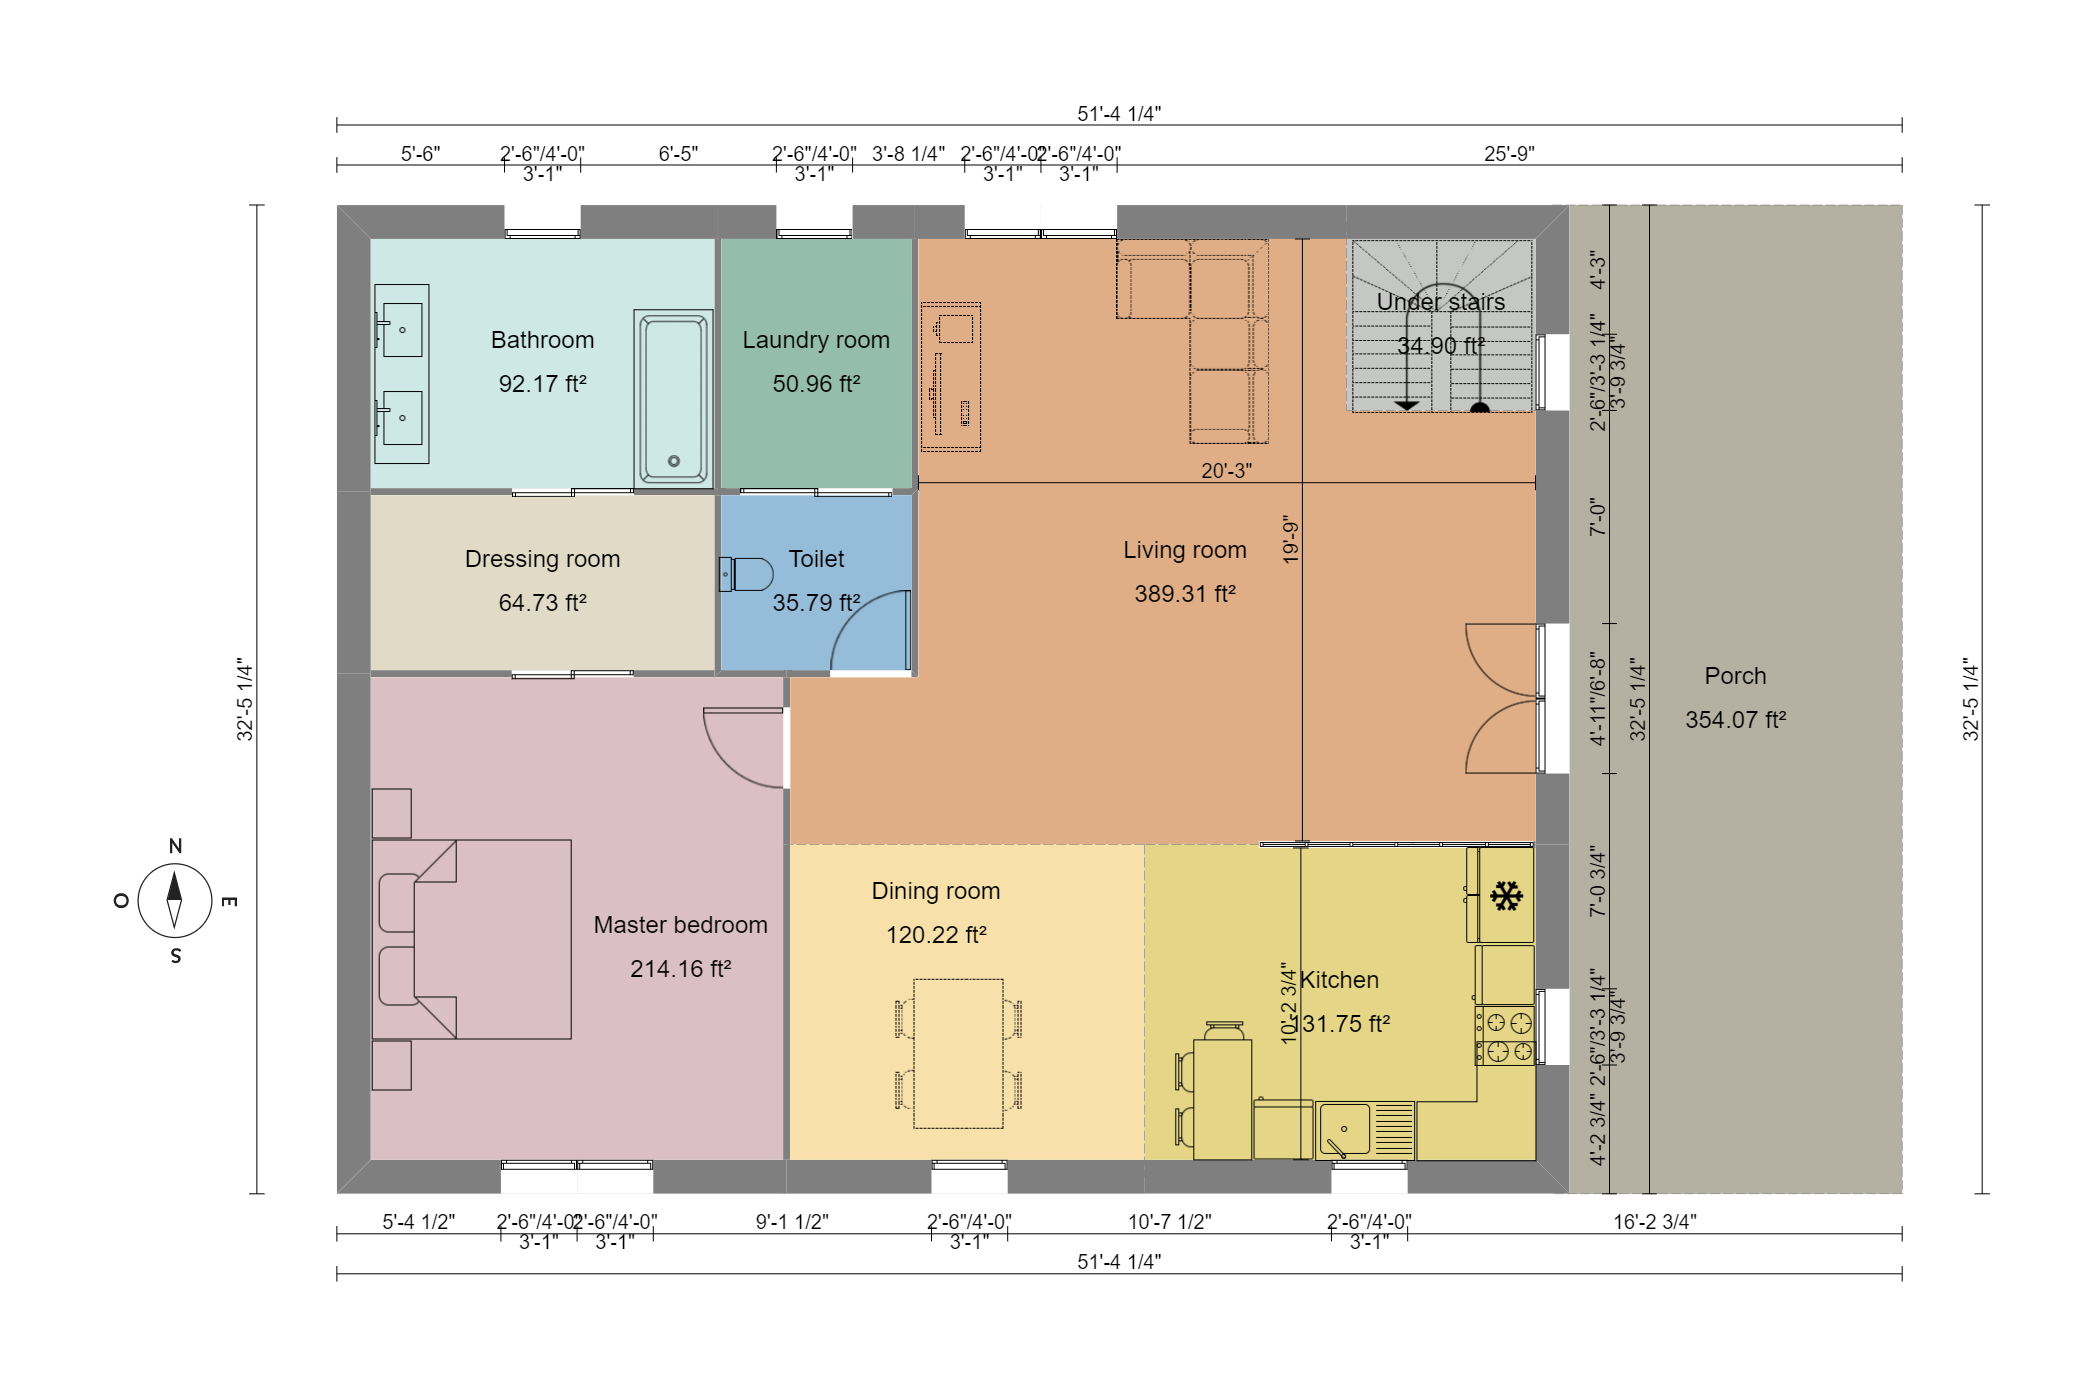 2D floor plan with dimensions designed with Cedreo